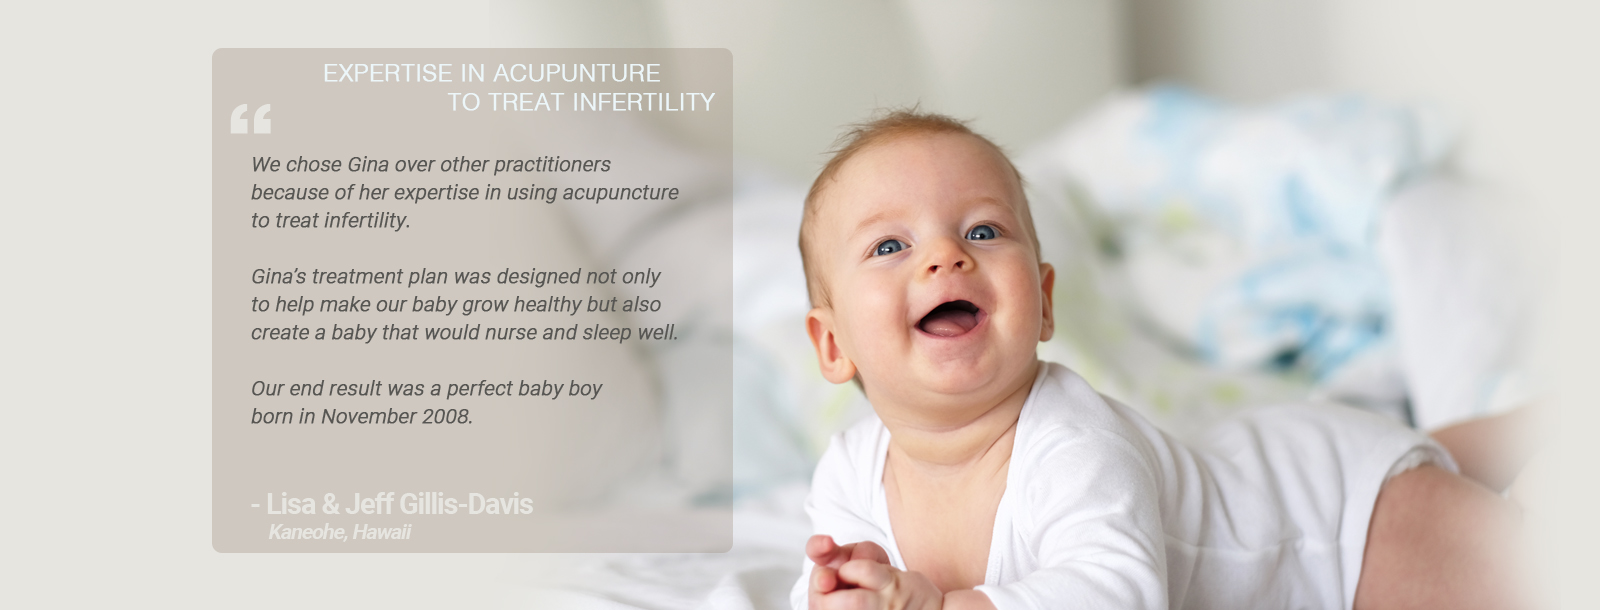 Acupuncture to treat infertility